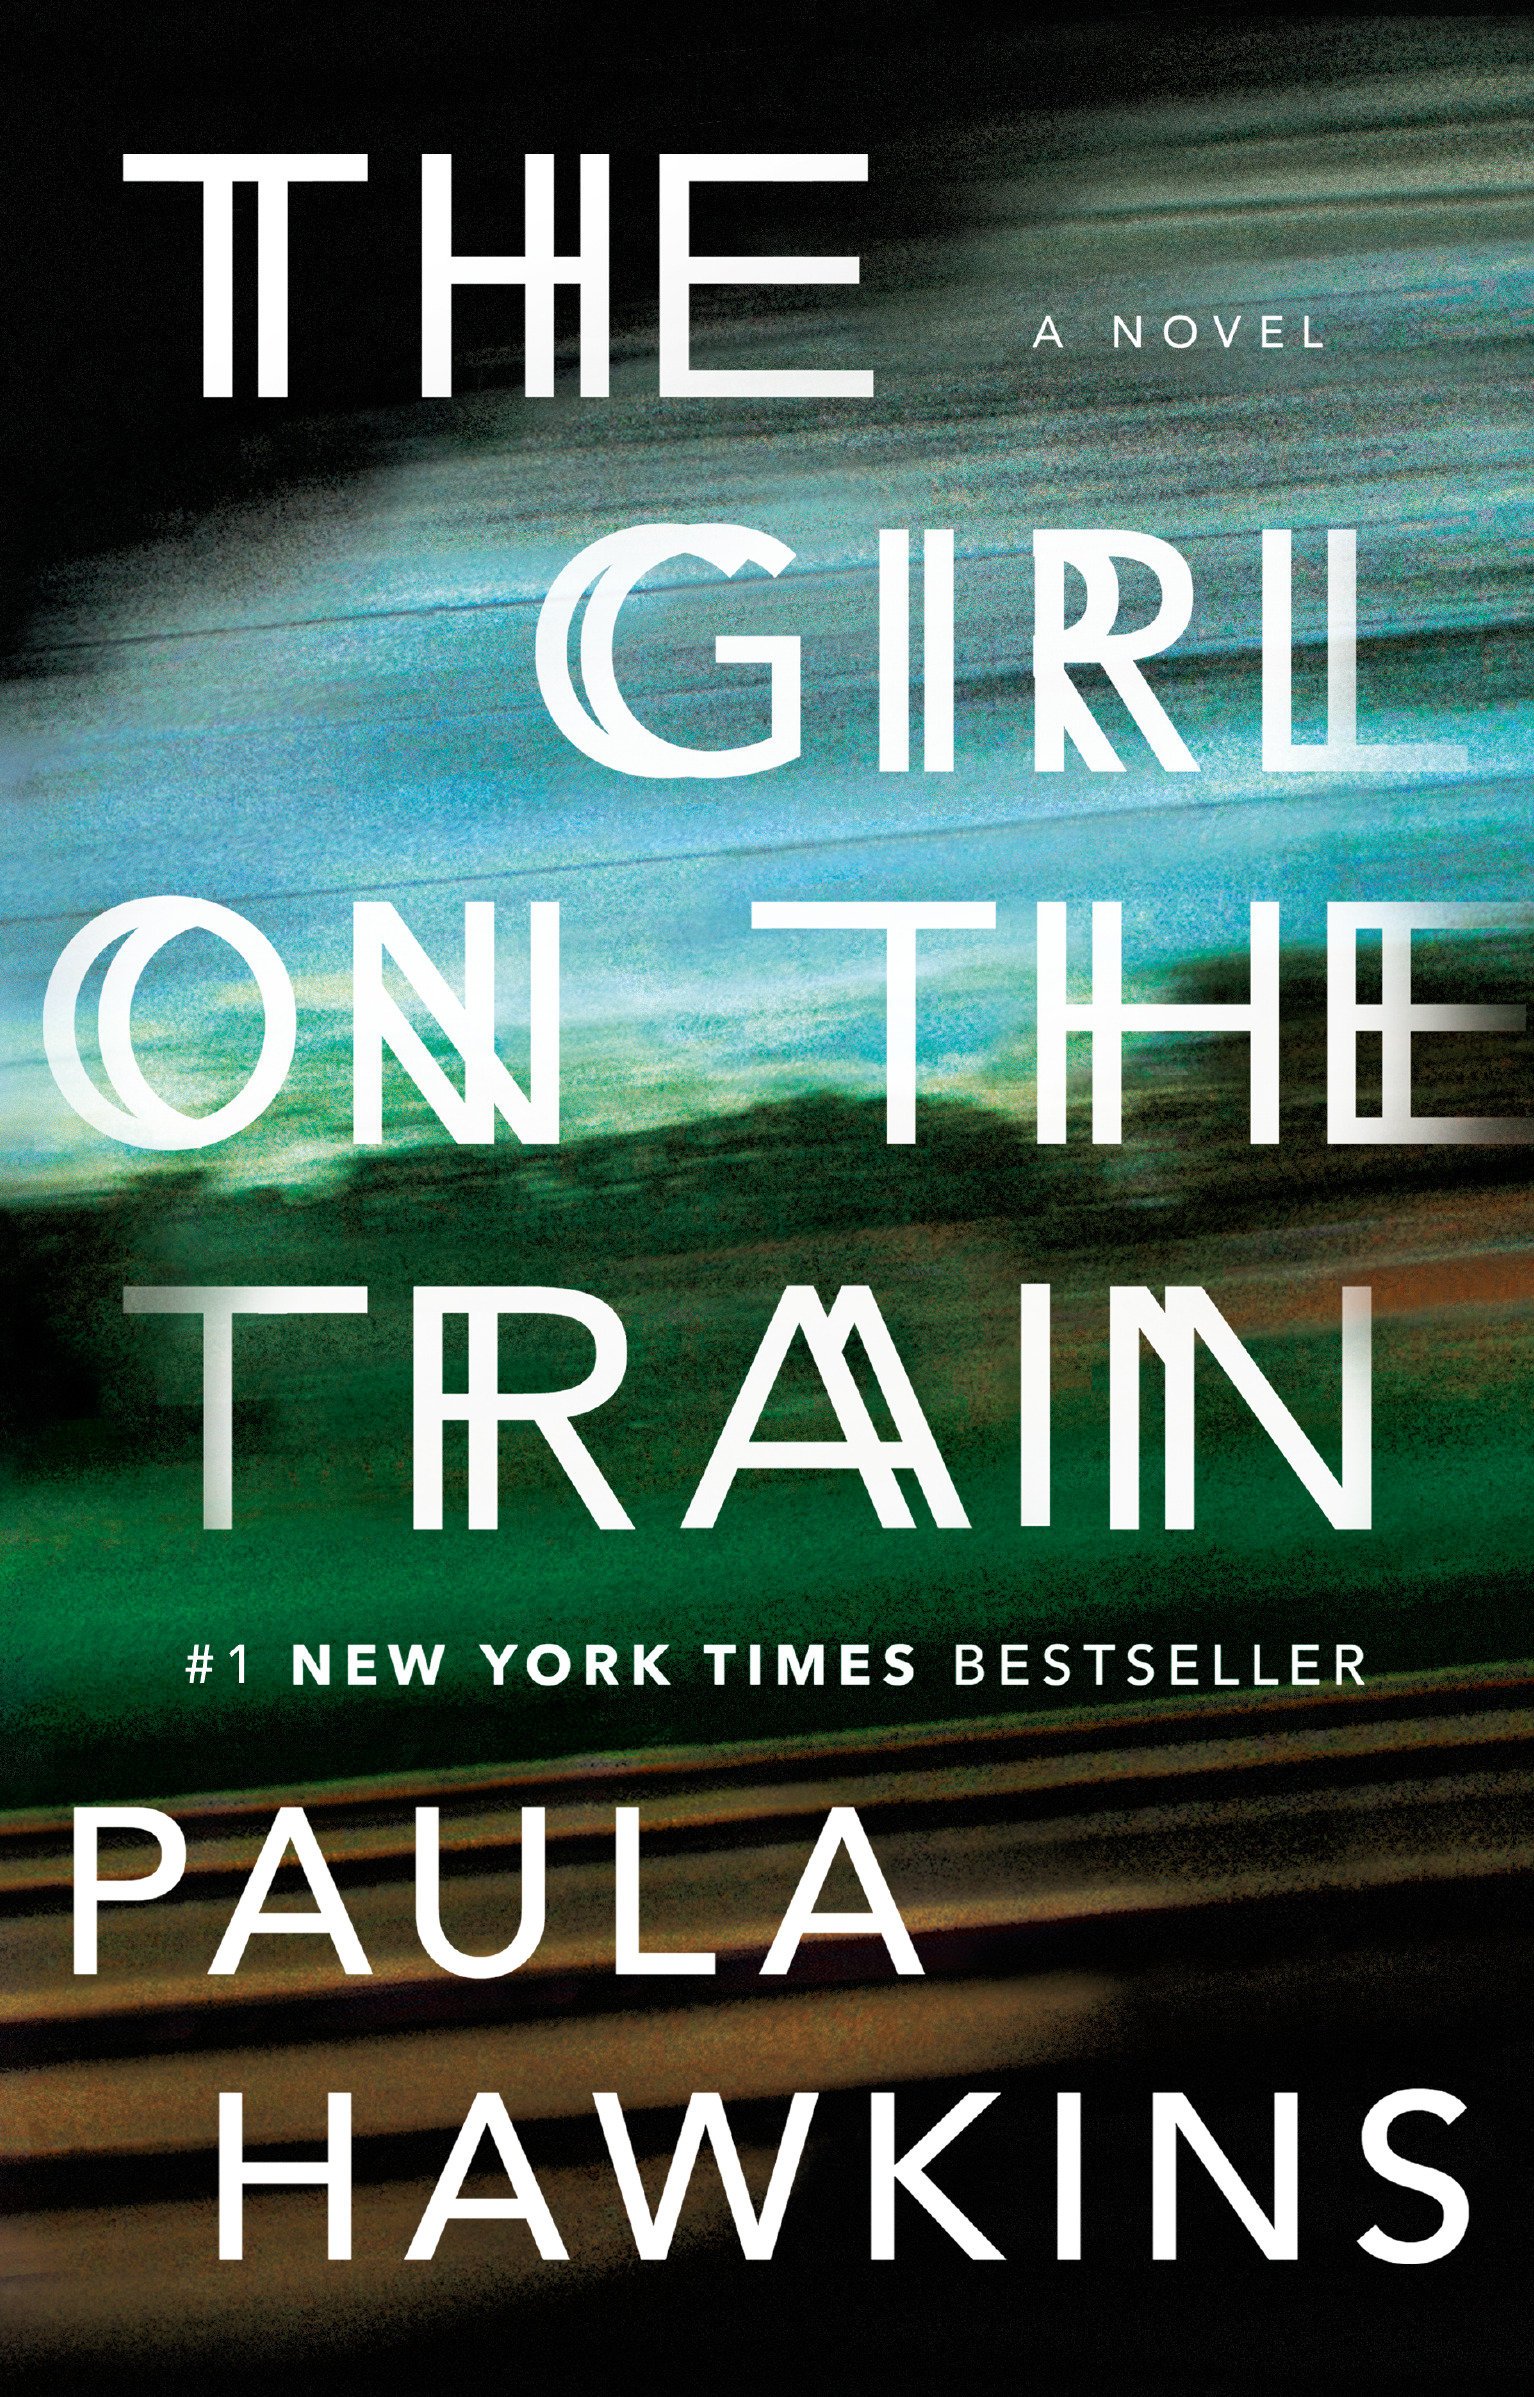 Cover of The Girl on the Train by Paula Hawkins